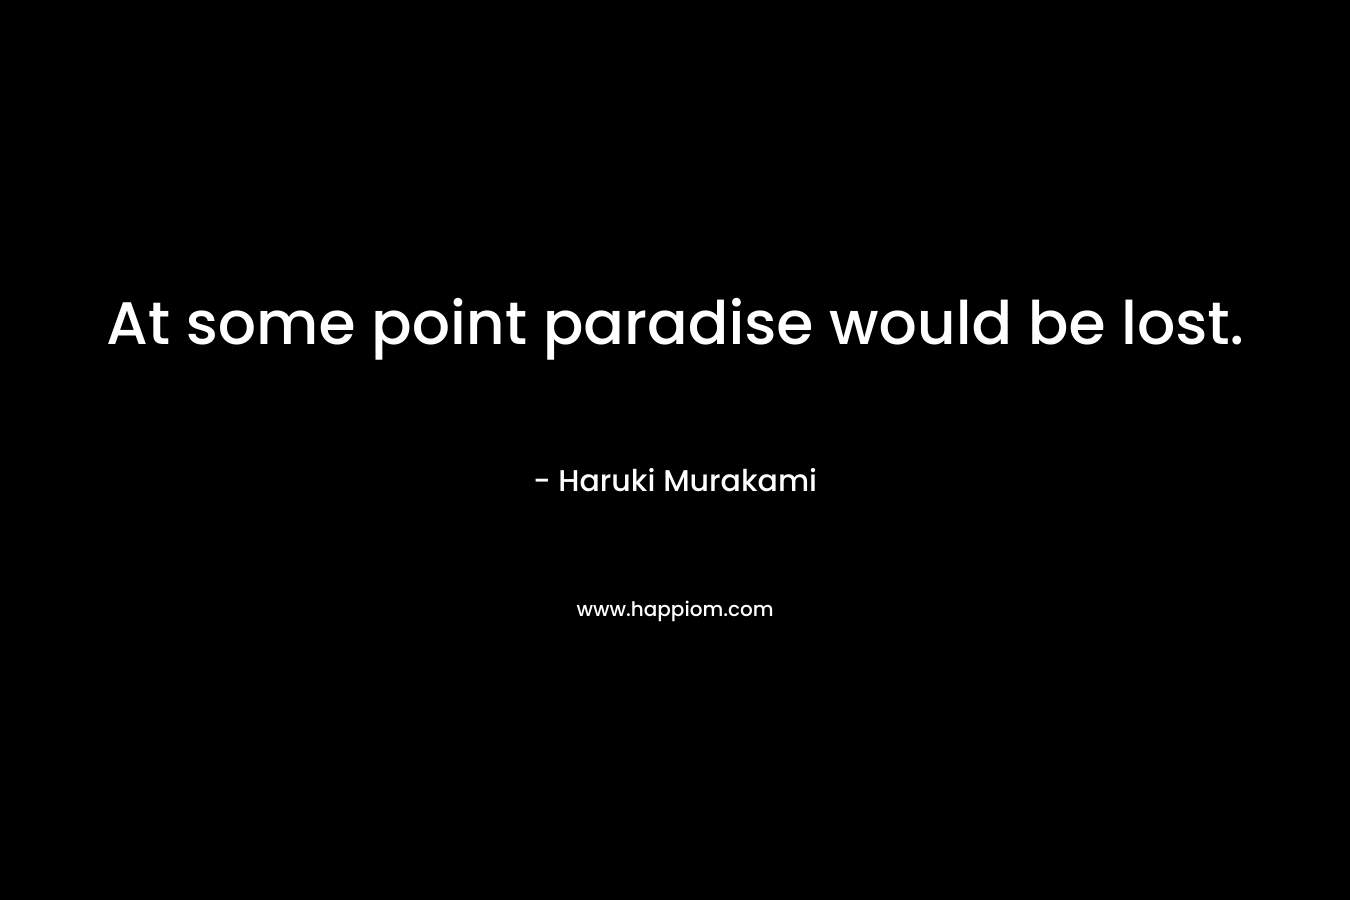 At some point paradise would be lost.